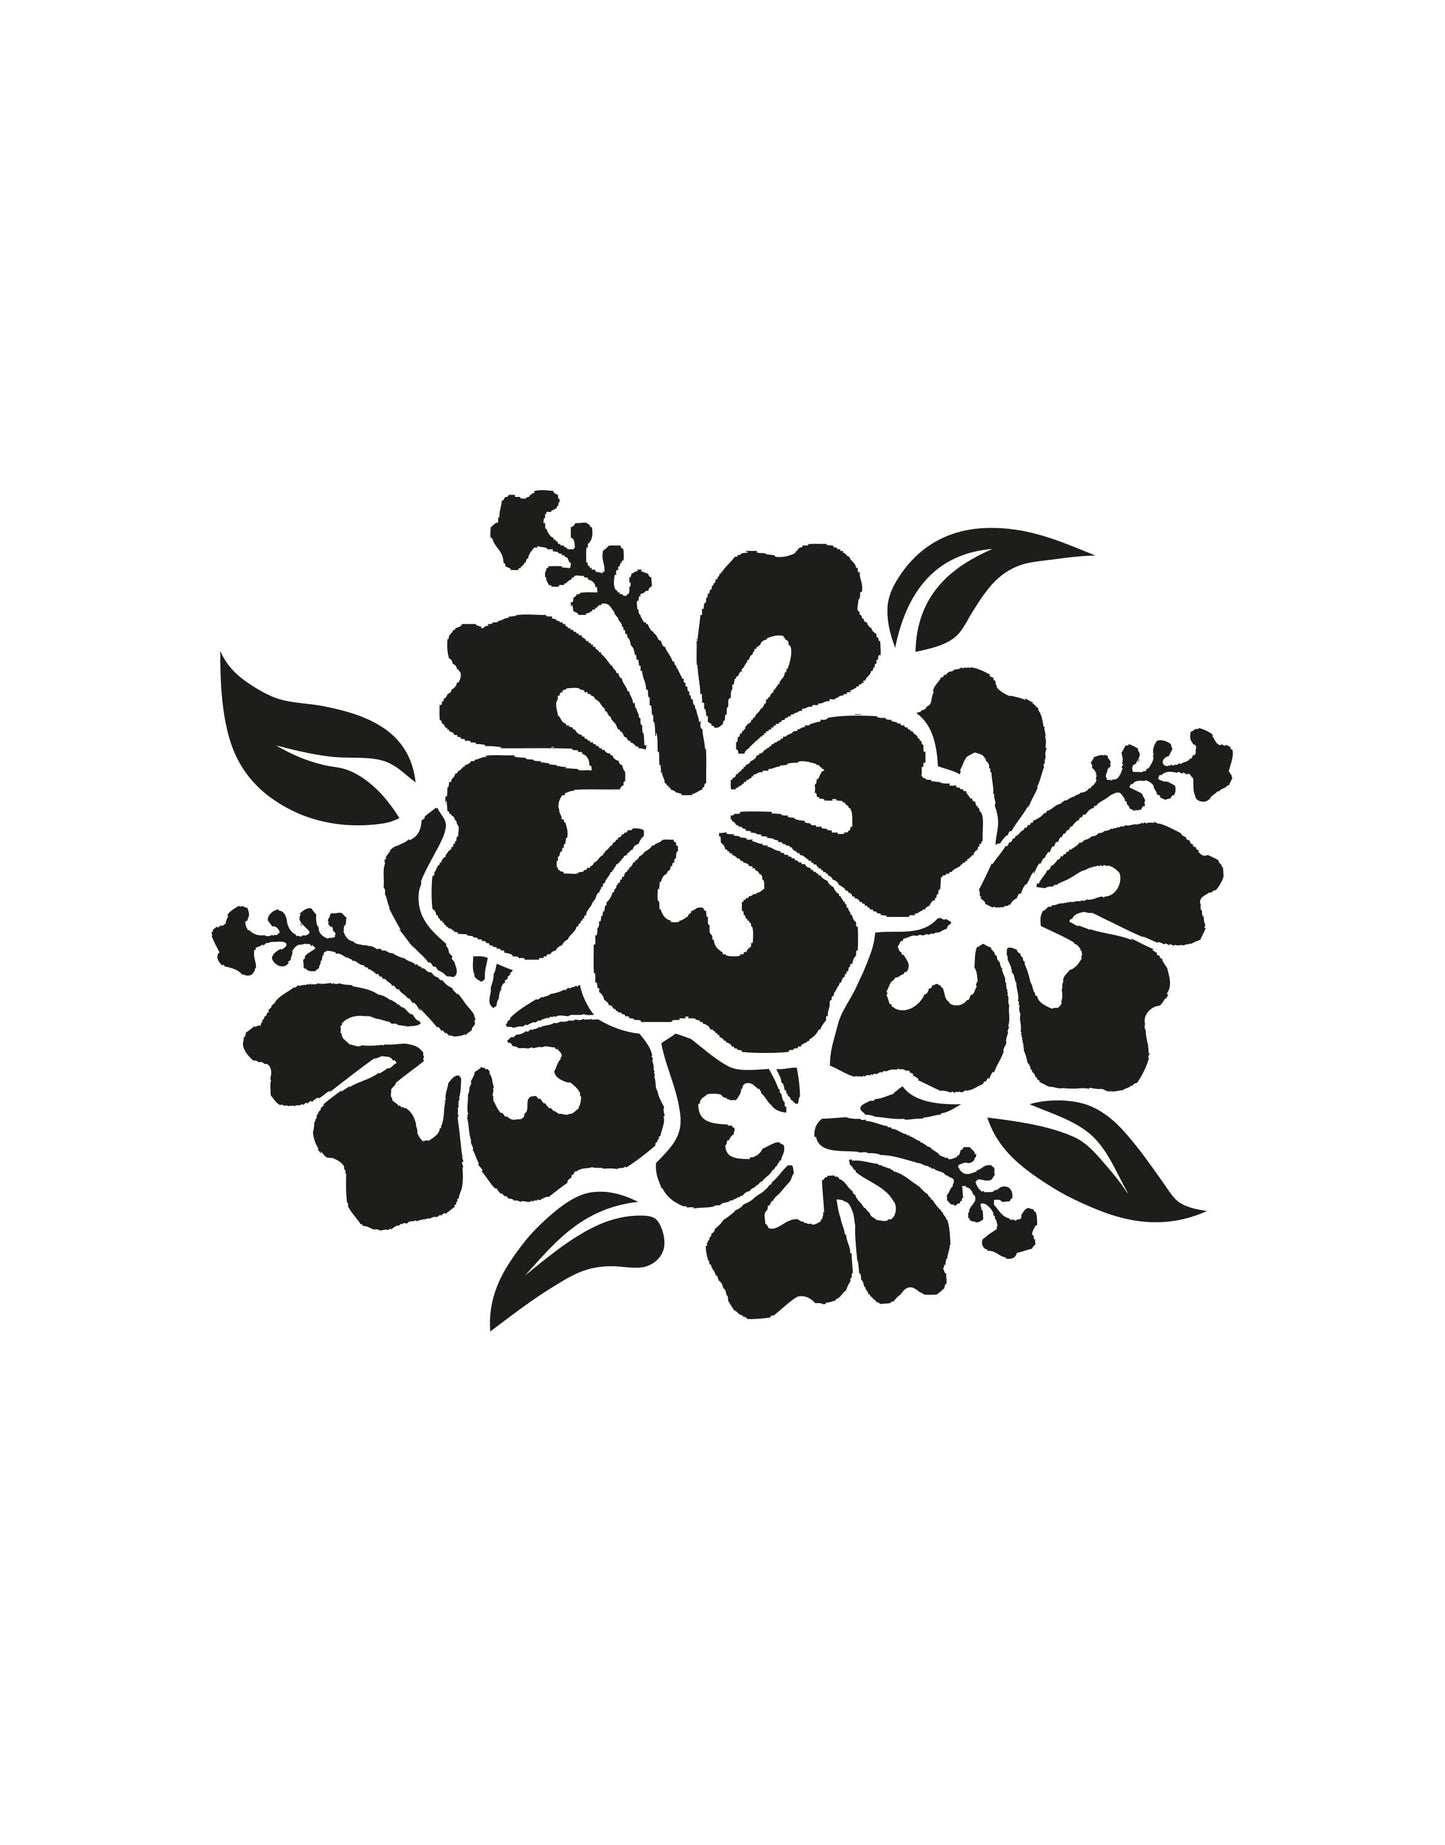 Hibiscus Flowers Vinyl Wall Decal Sticker. #OS_AA238